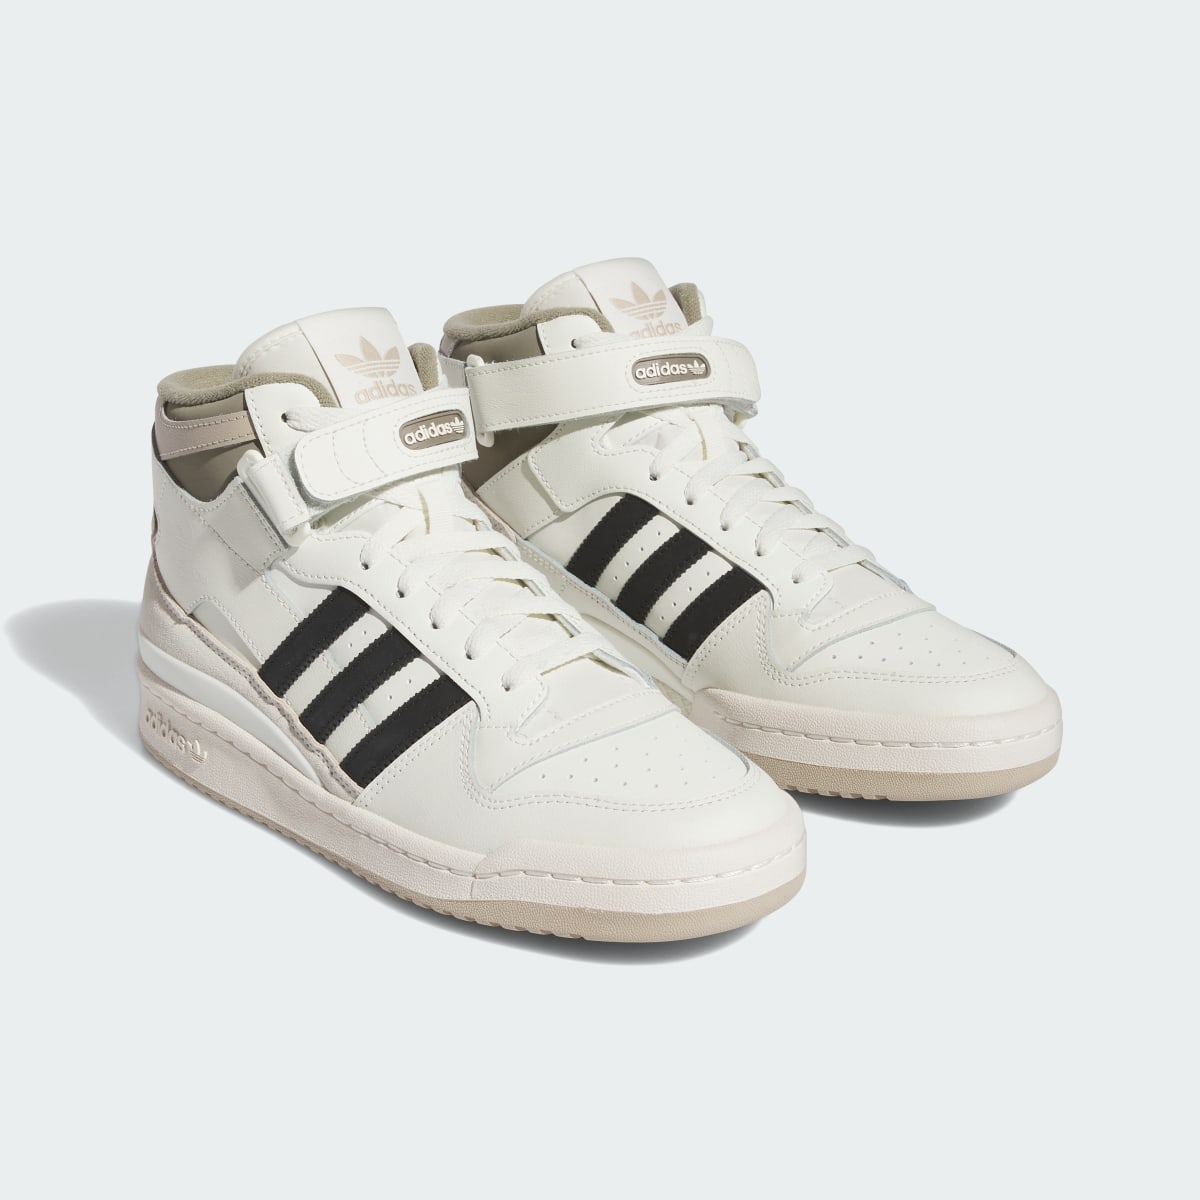 Adidas Forum Mid Shoes. 5